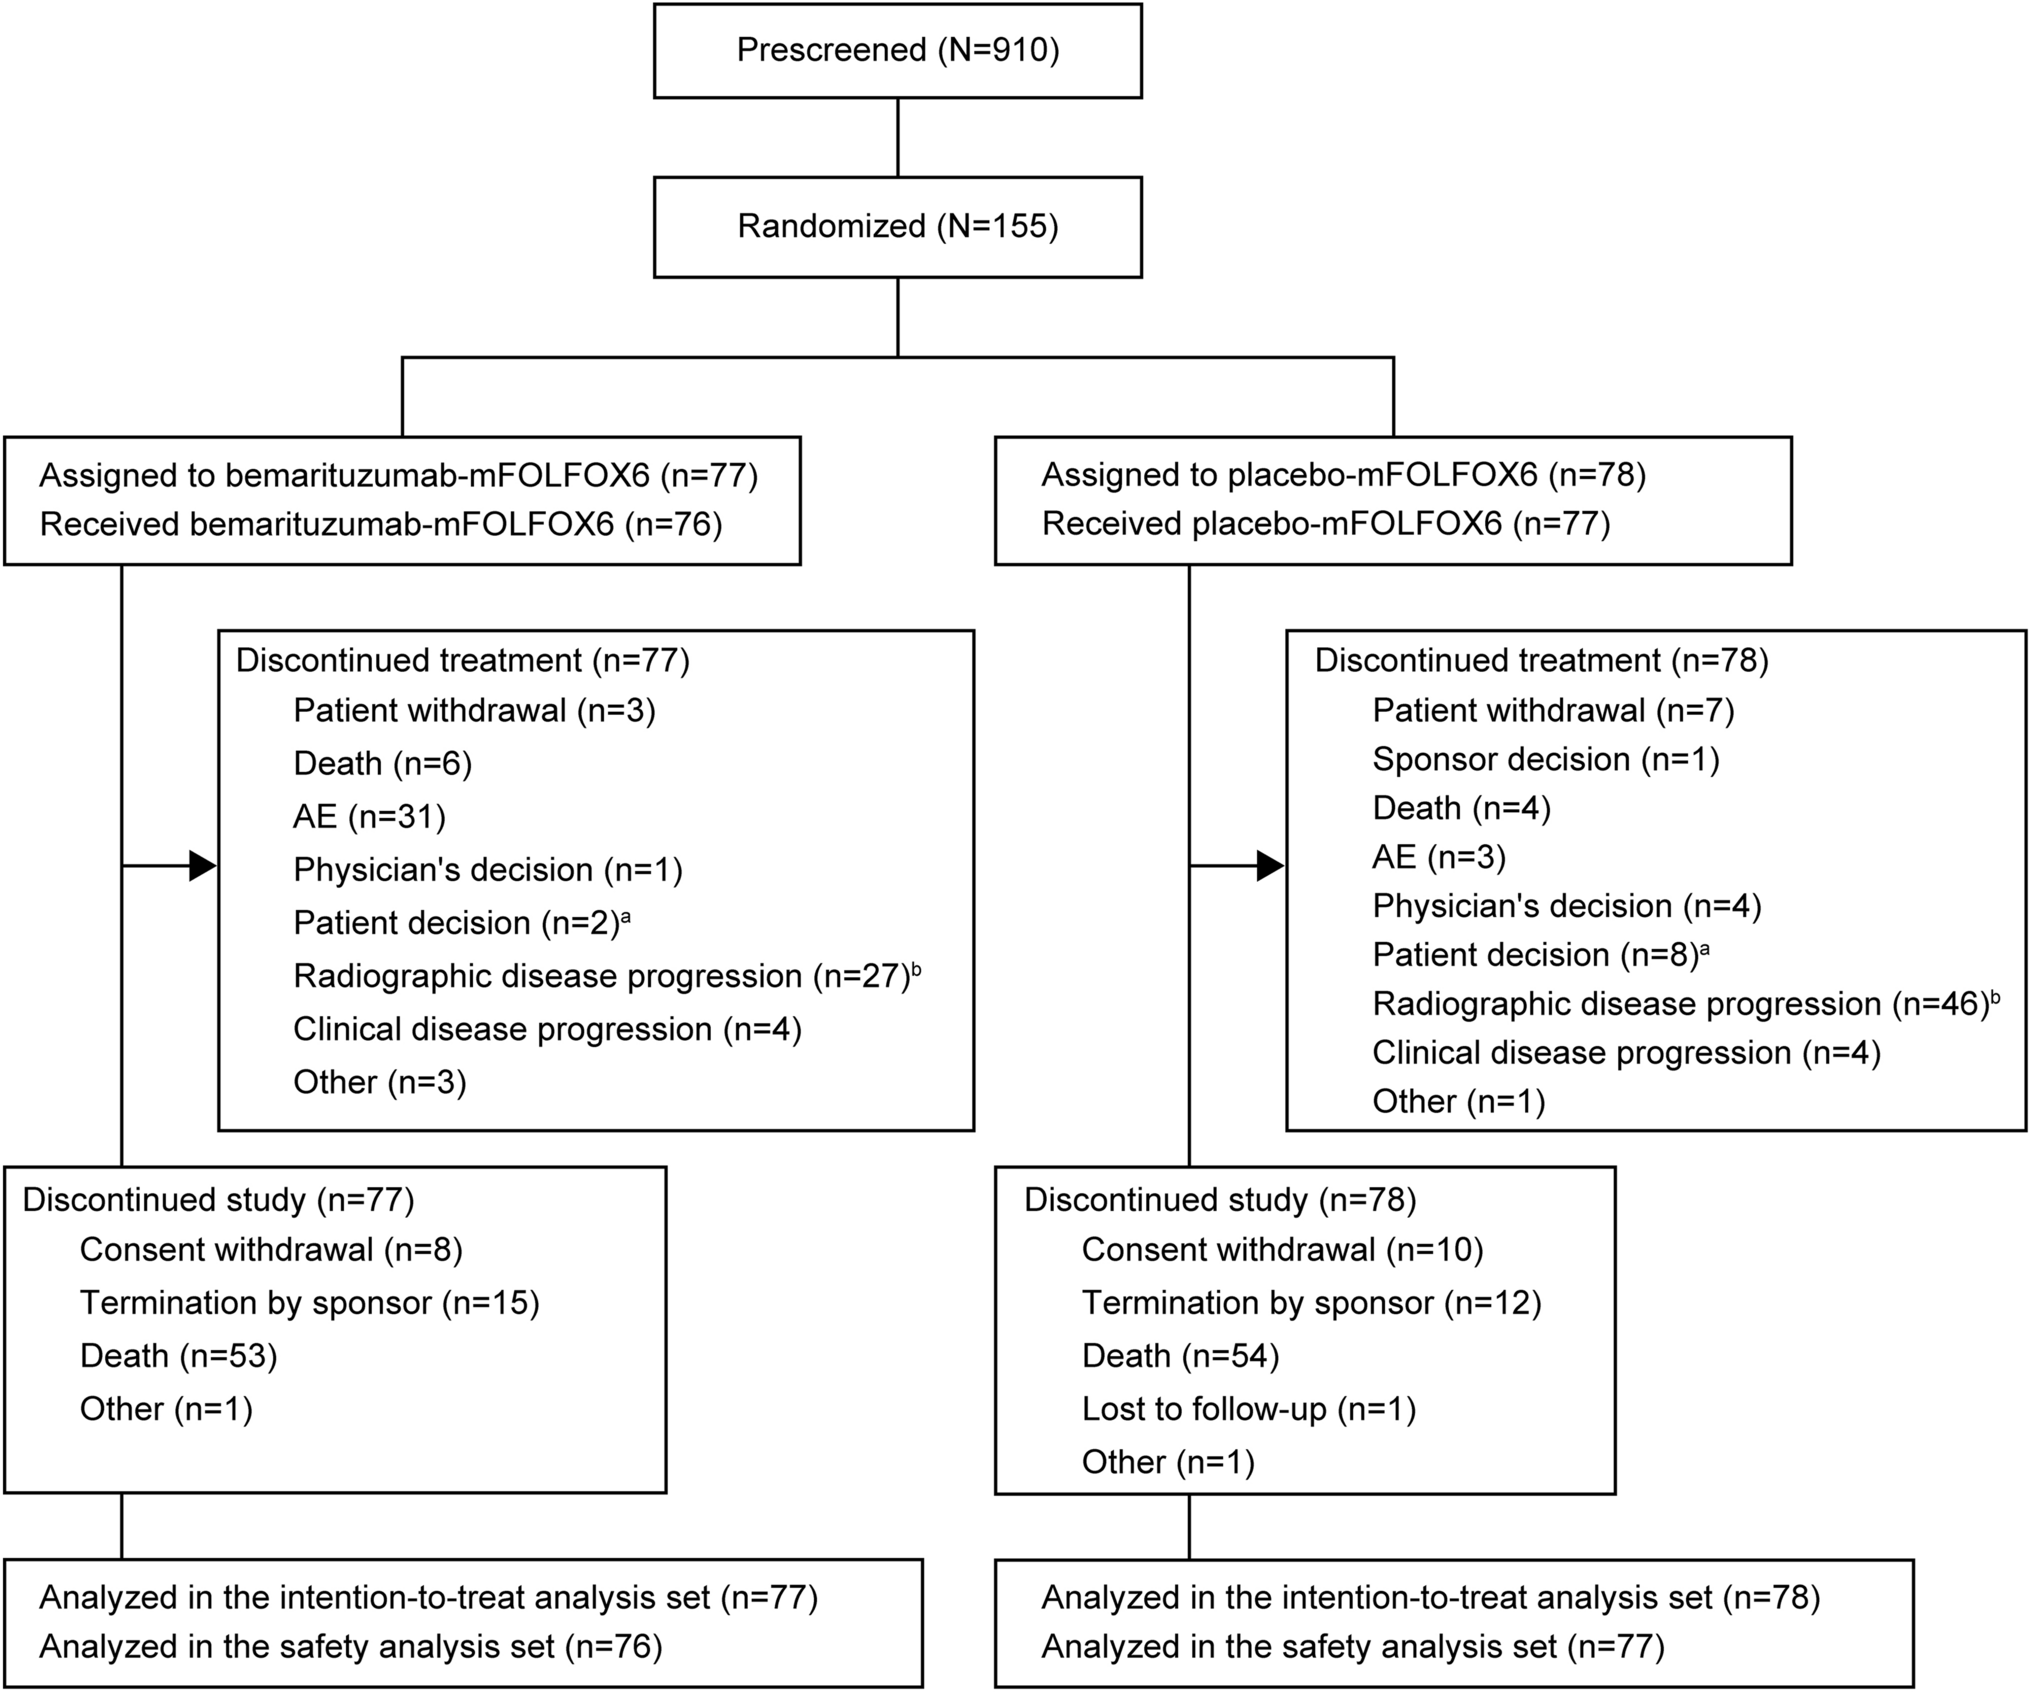 Bemarituzumab as first-line treatment for locally advanced or metastatic gastric/gastroesophageal junction adenocarcinoma: final analysis of the randomized phase 2 FIGHT trial